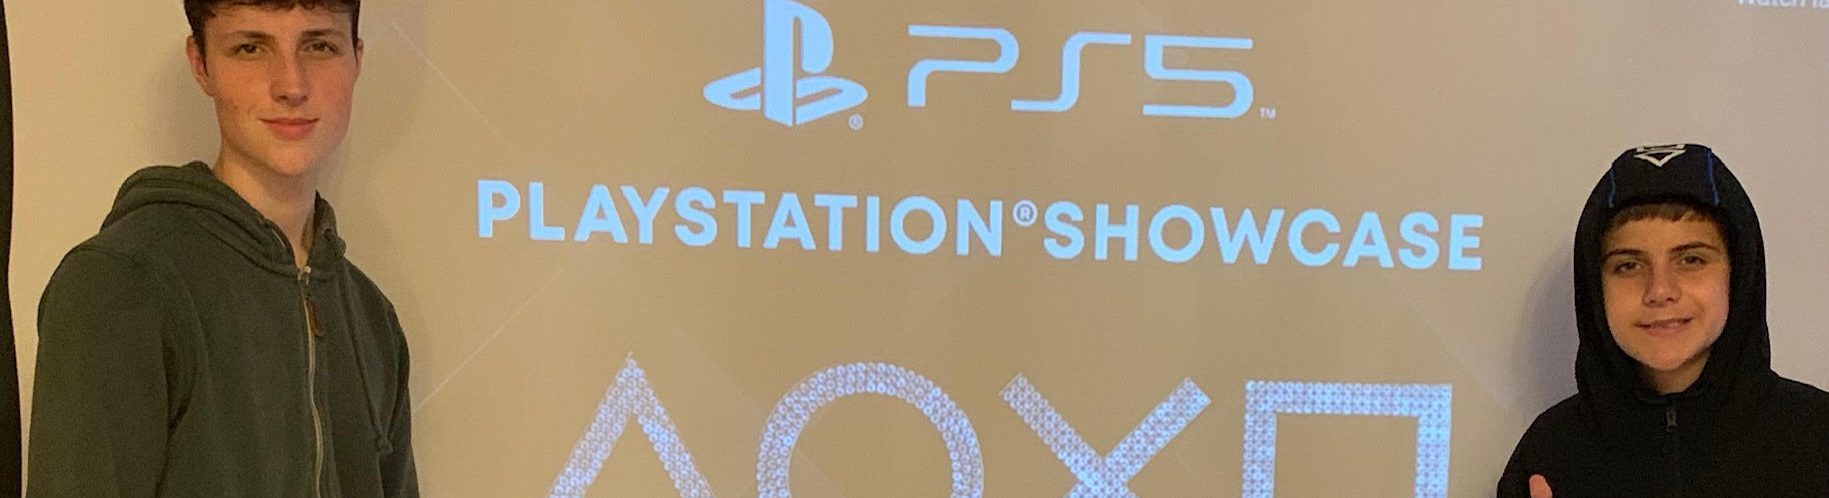 PlayStation 5 Showcase 9th September 2021 - New Games for 2021 to 2023!!! -  Youth #gottit